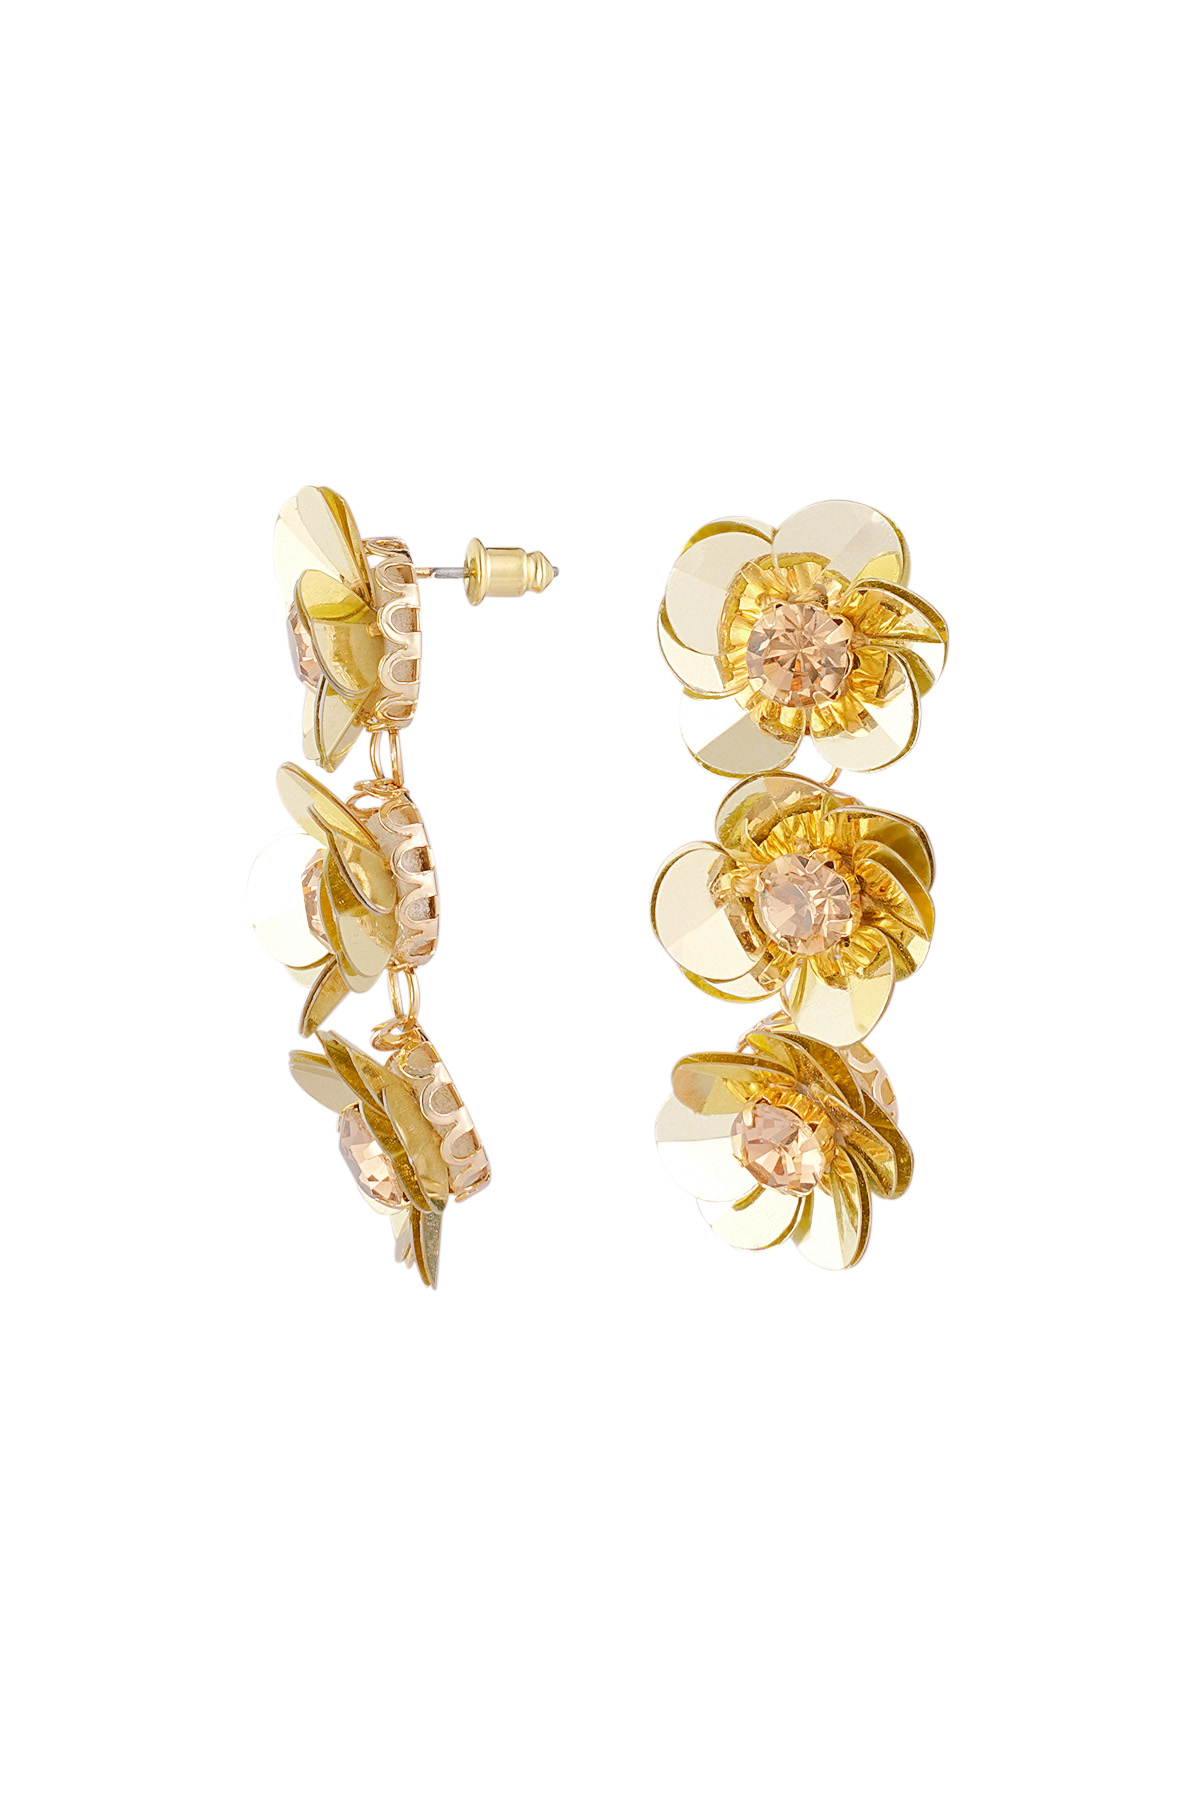 Summery floral trio earrings - gold